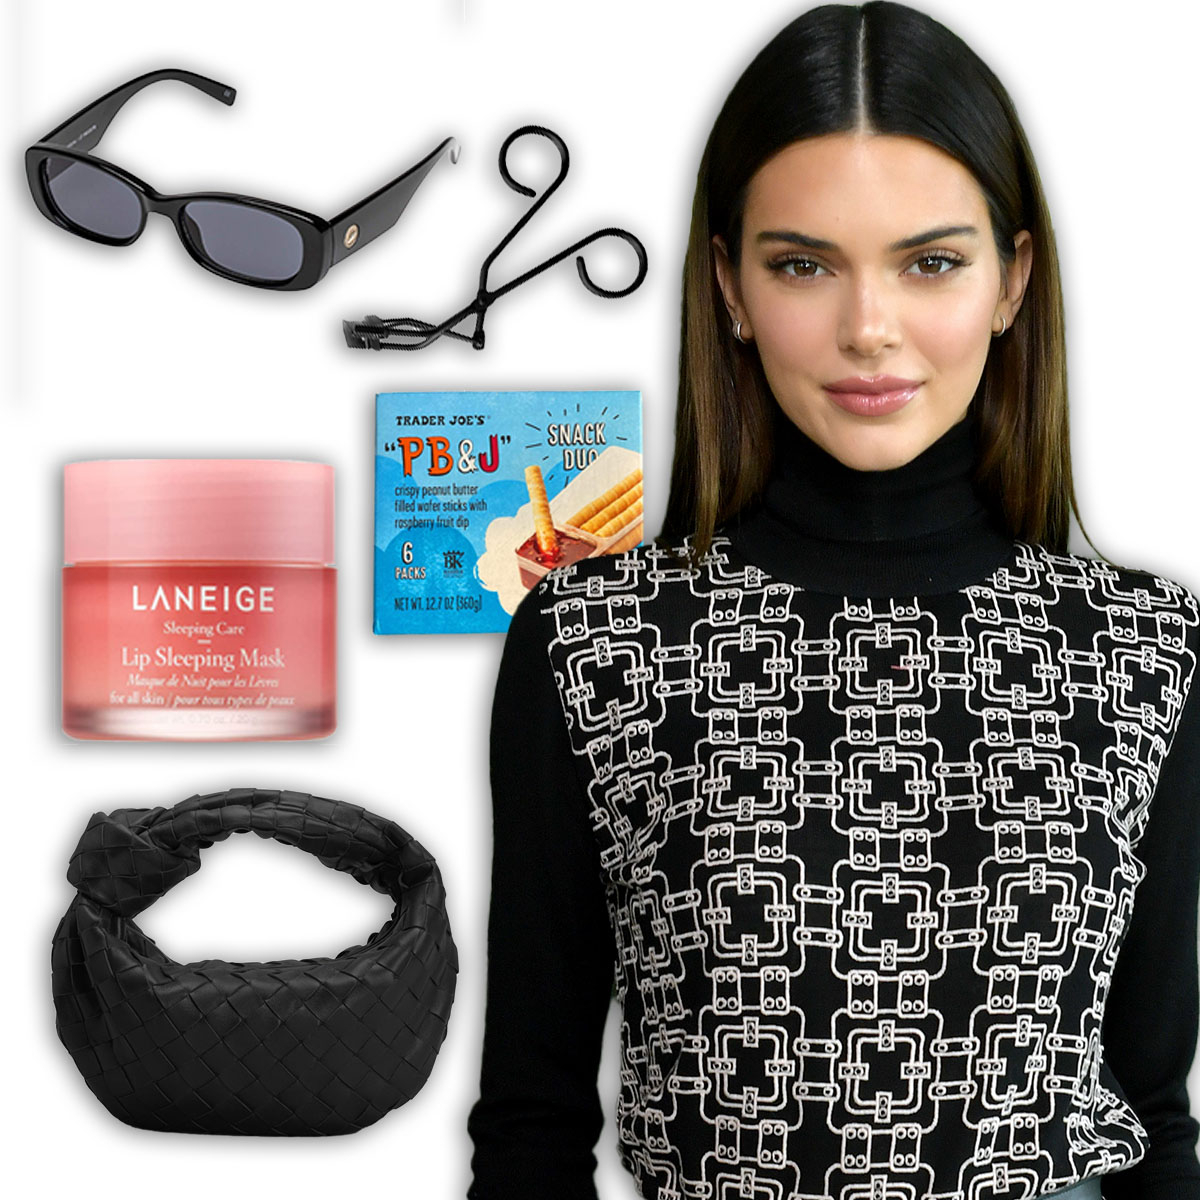 Kendall Jenner could be using tiny bags for things other than